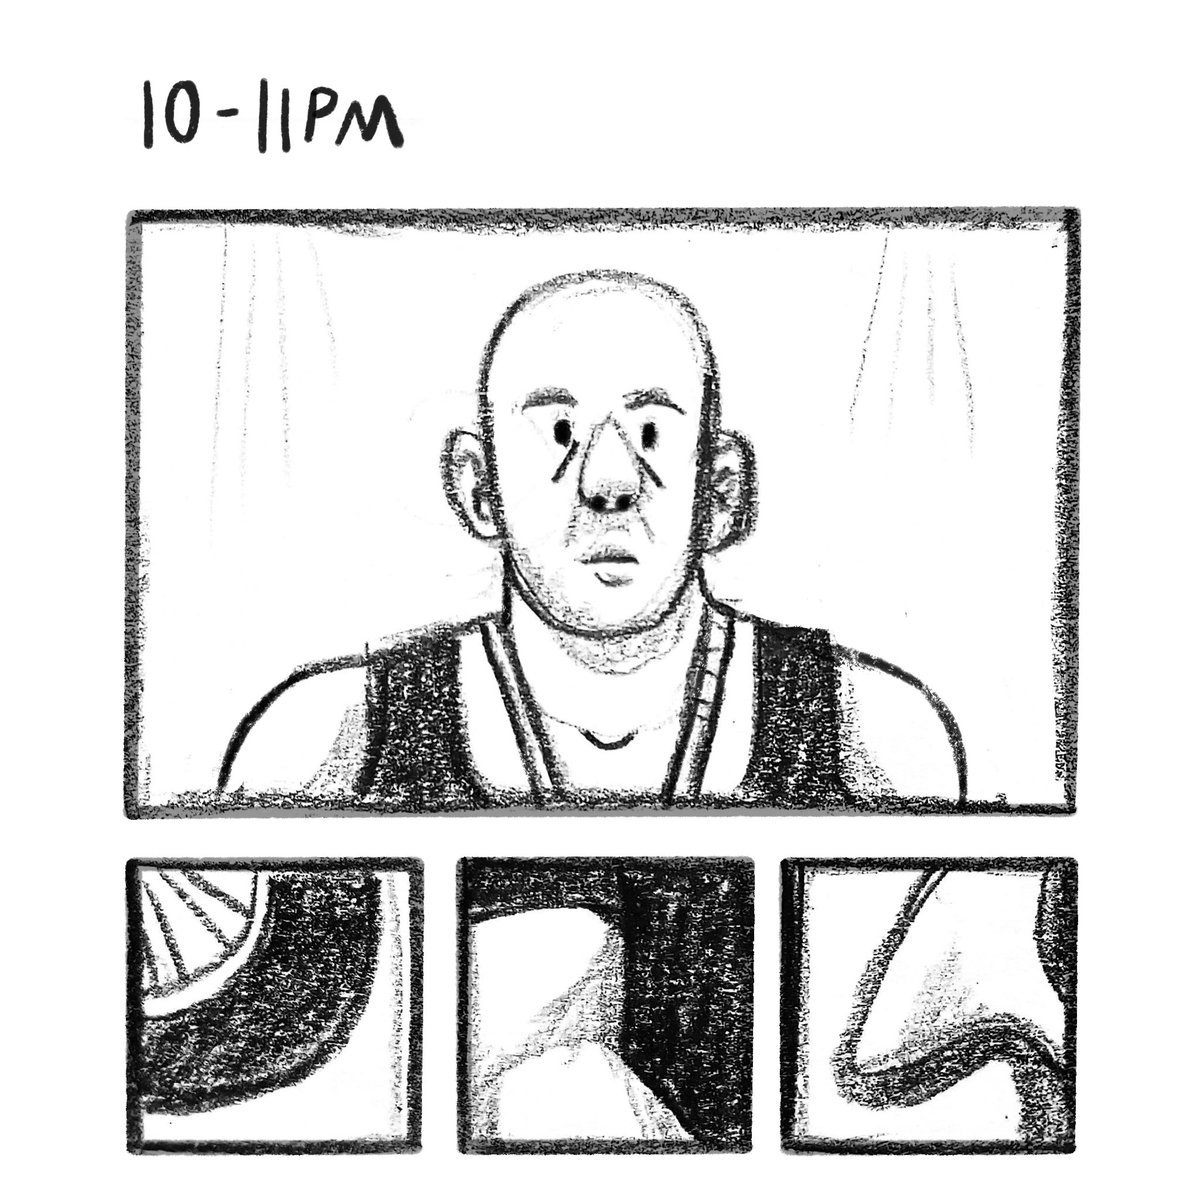 #hourlycomicday 10-11PM: Watching fast n furious 6 on discord for some reason 